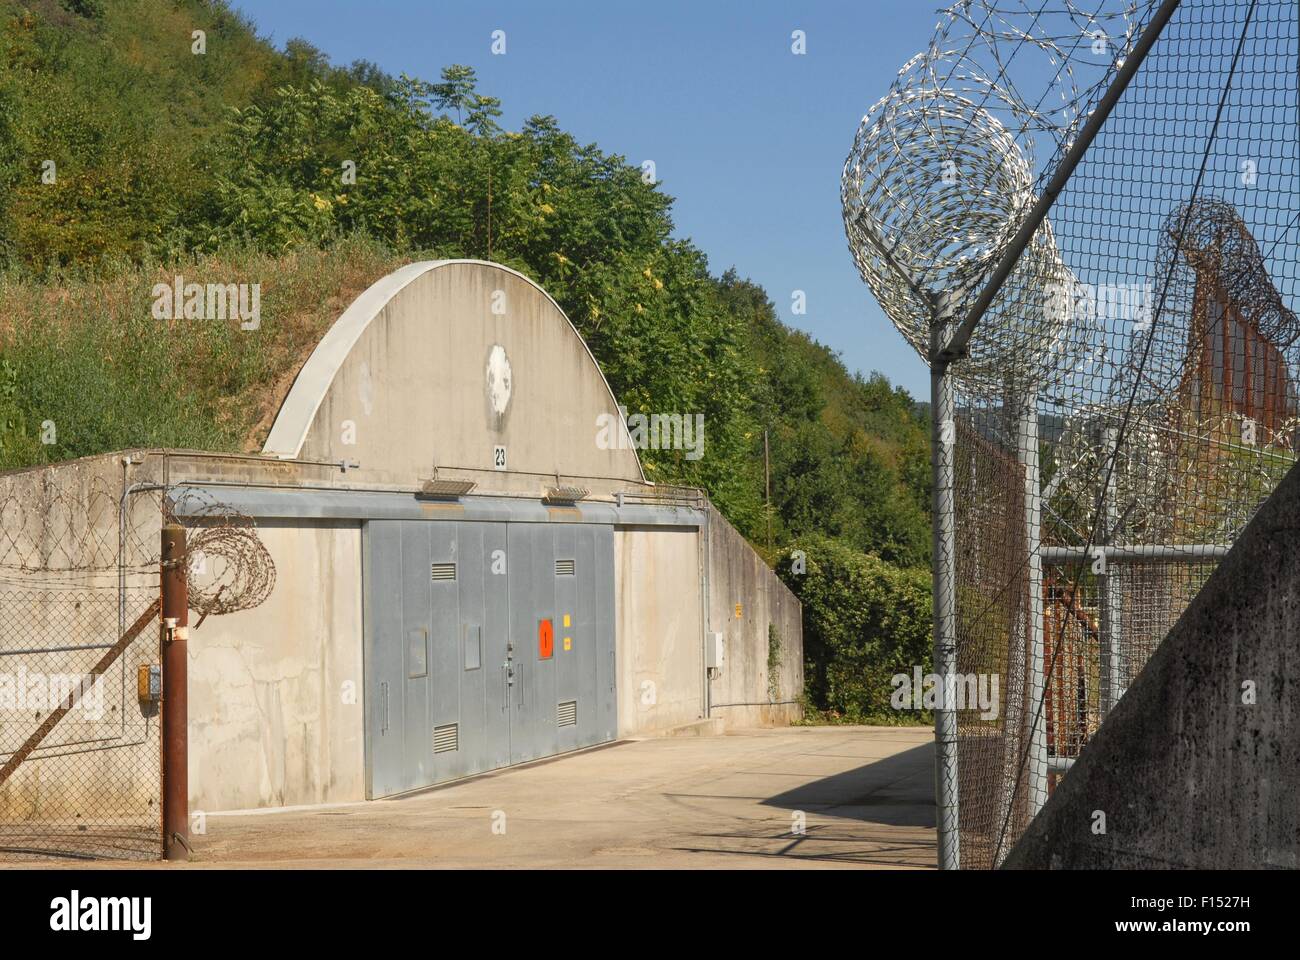 Italy, Camp Ederle US Army base in Vicenza, ammunition warehouse ASP 7 (Ammunition Supply Point 7) in Tormeno Stock Photo